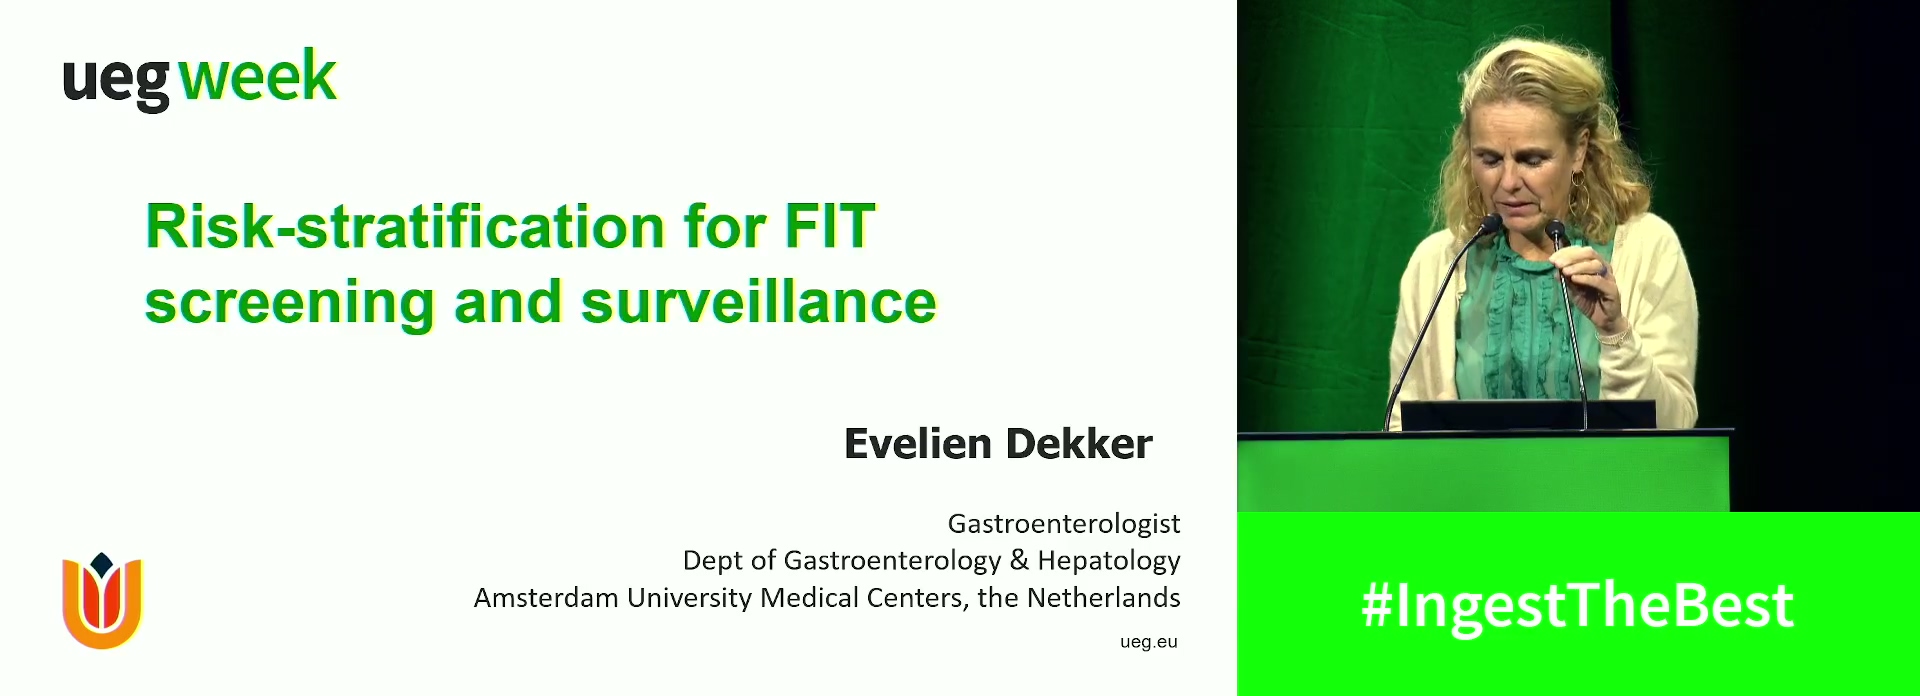 Risk-stratification for FIT screening and surveillance